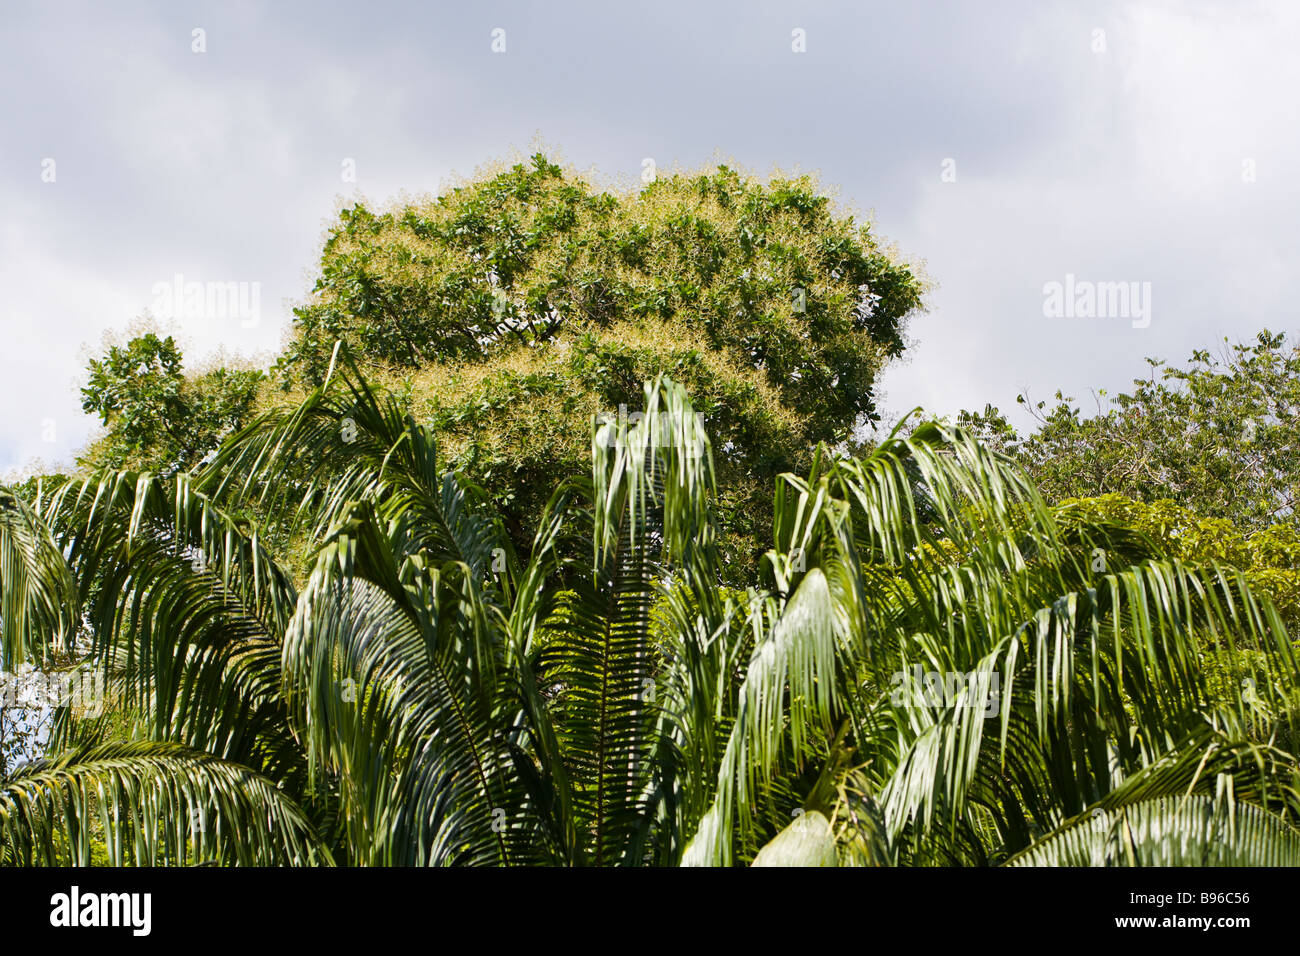 African oil palm (Elaeis guineensis) growing in the Osa Peninsula of Costa Rica. Stock Photo